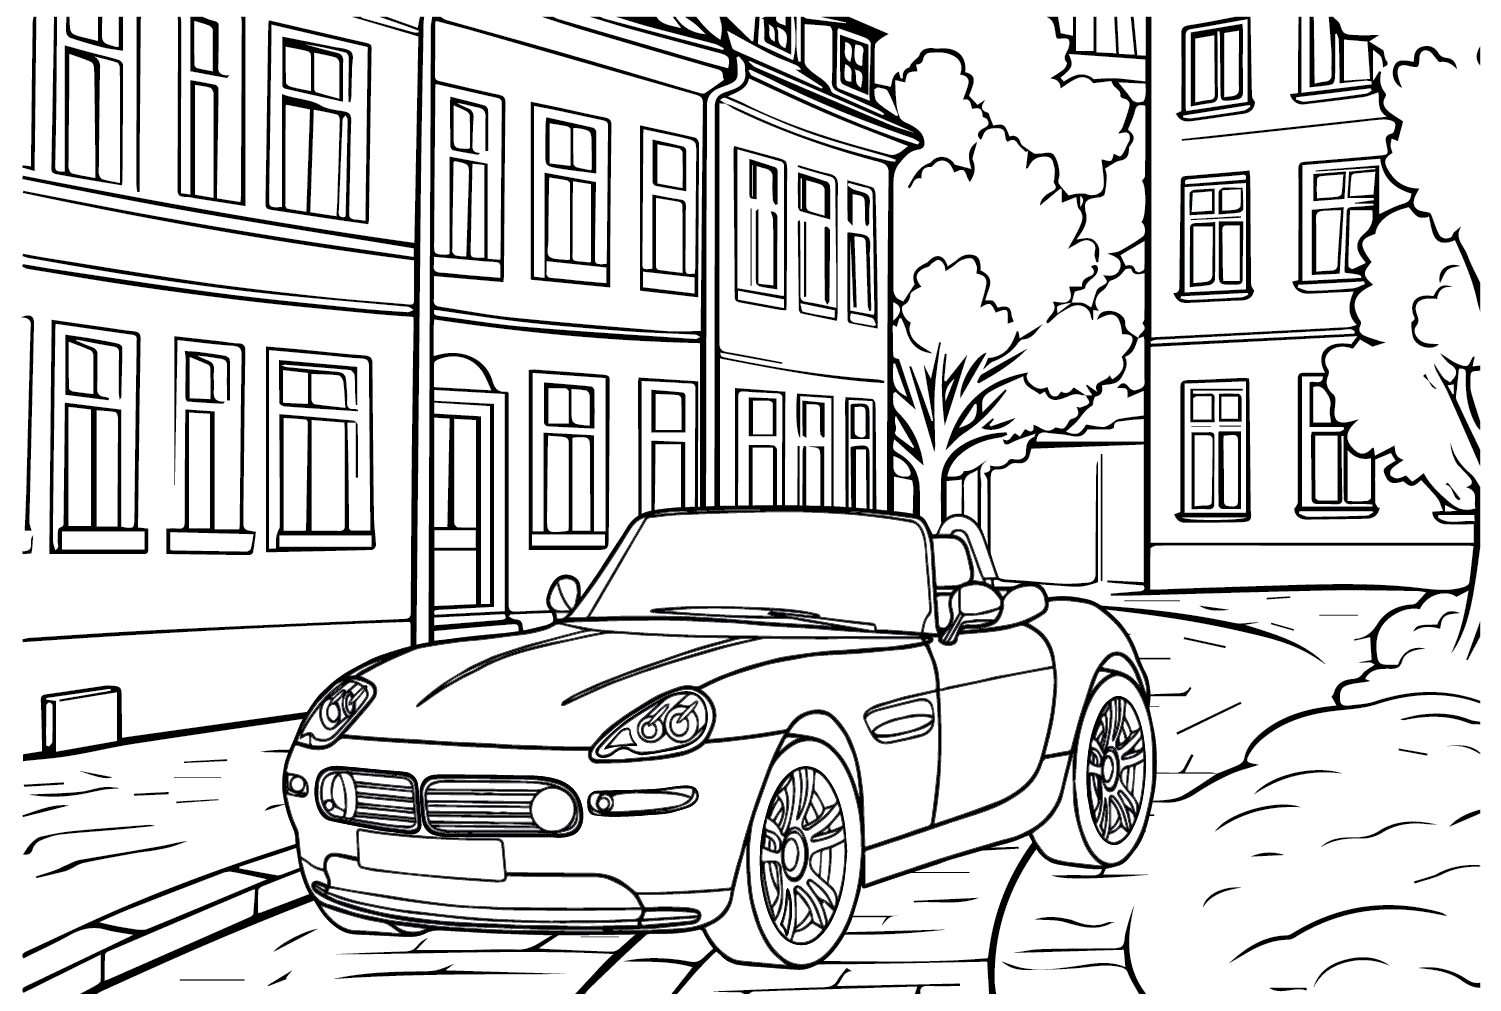 BMW Z8 Cabriolet Coloring Page from BMW